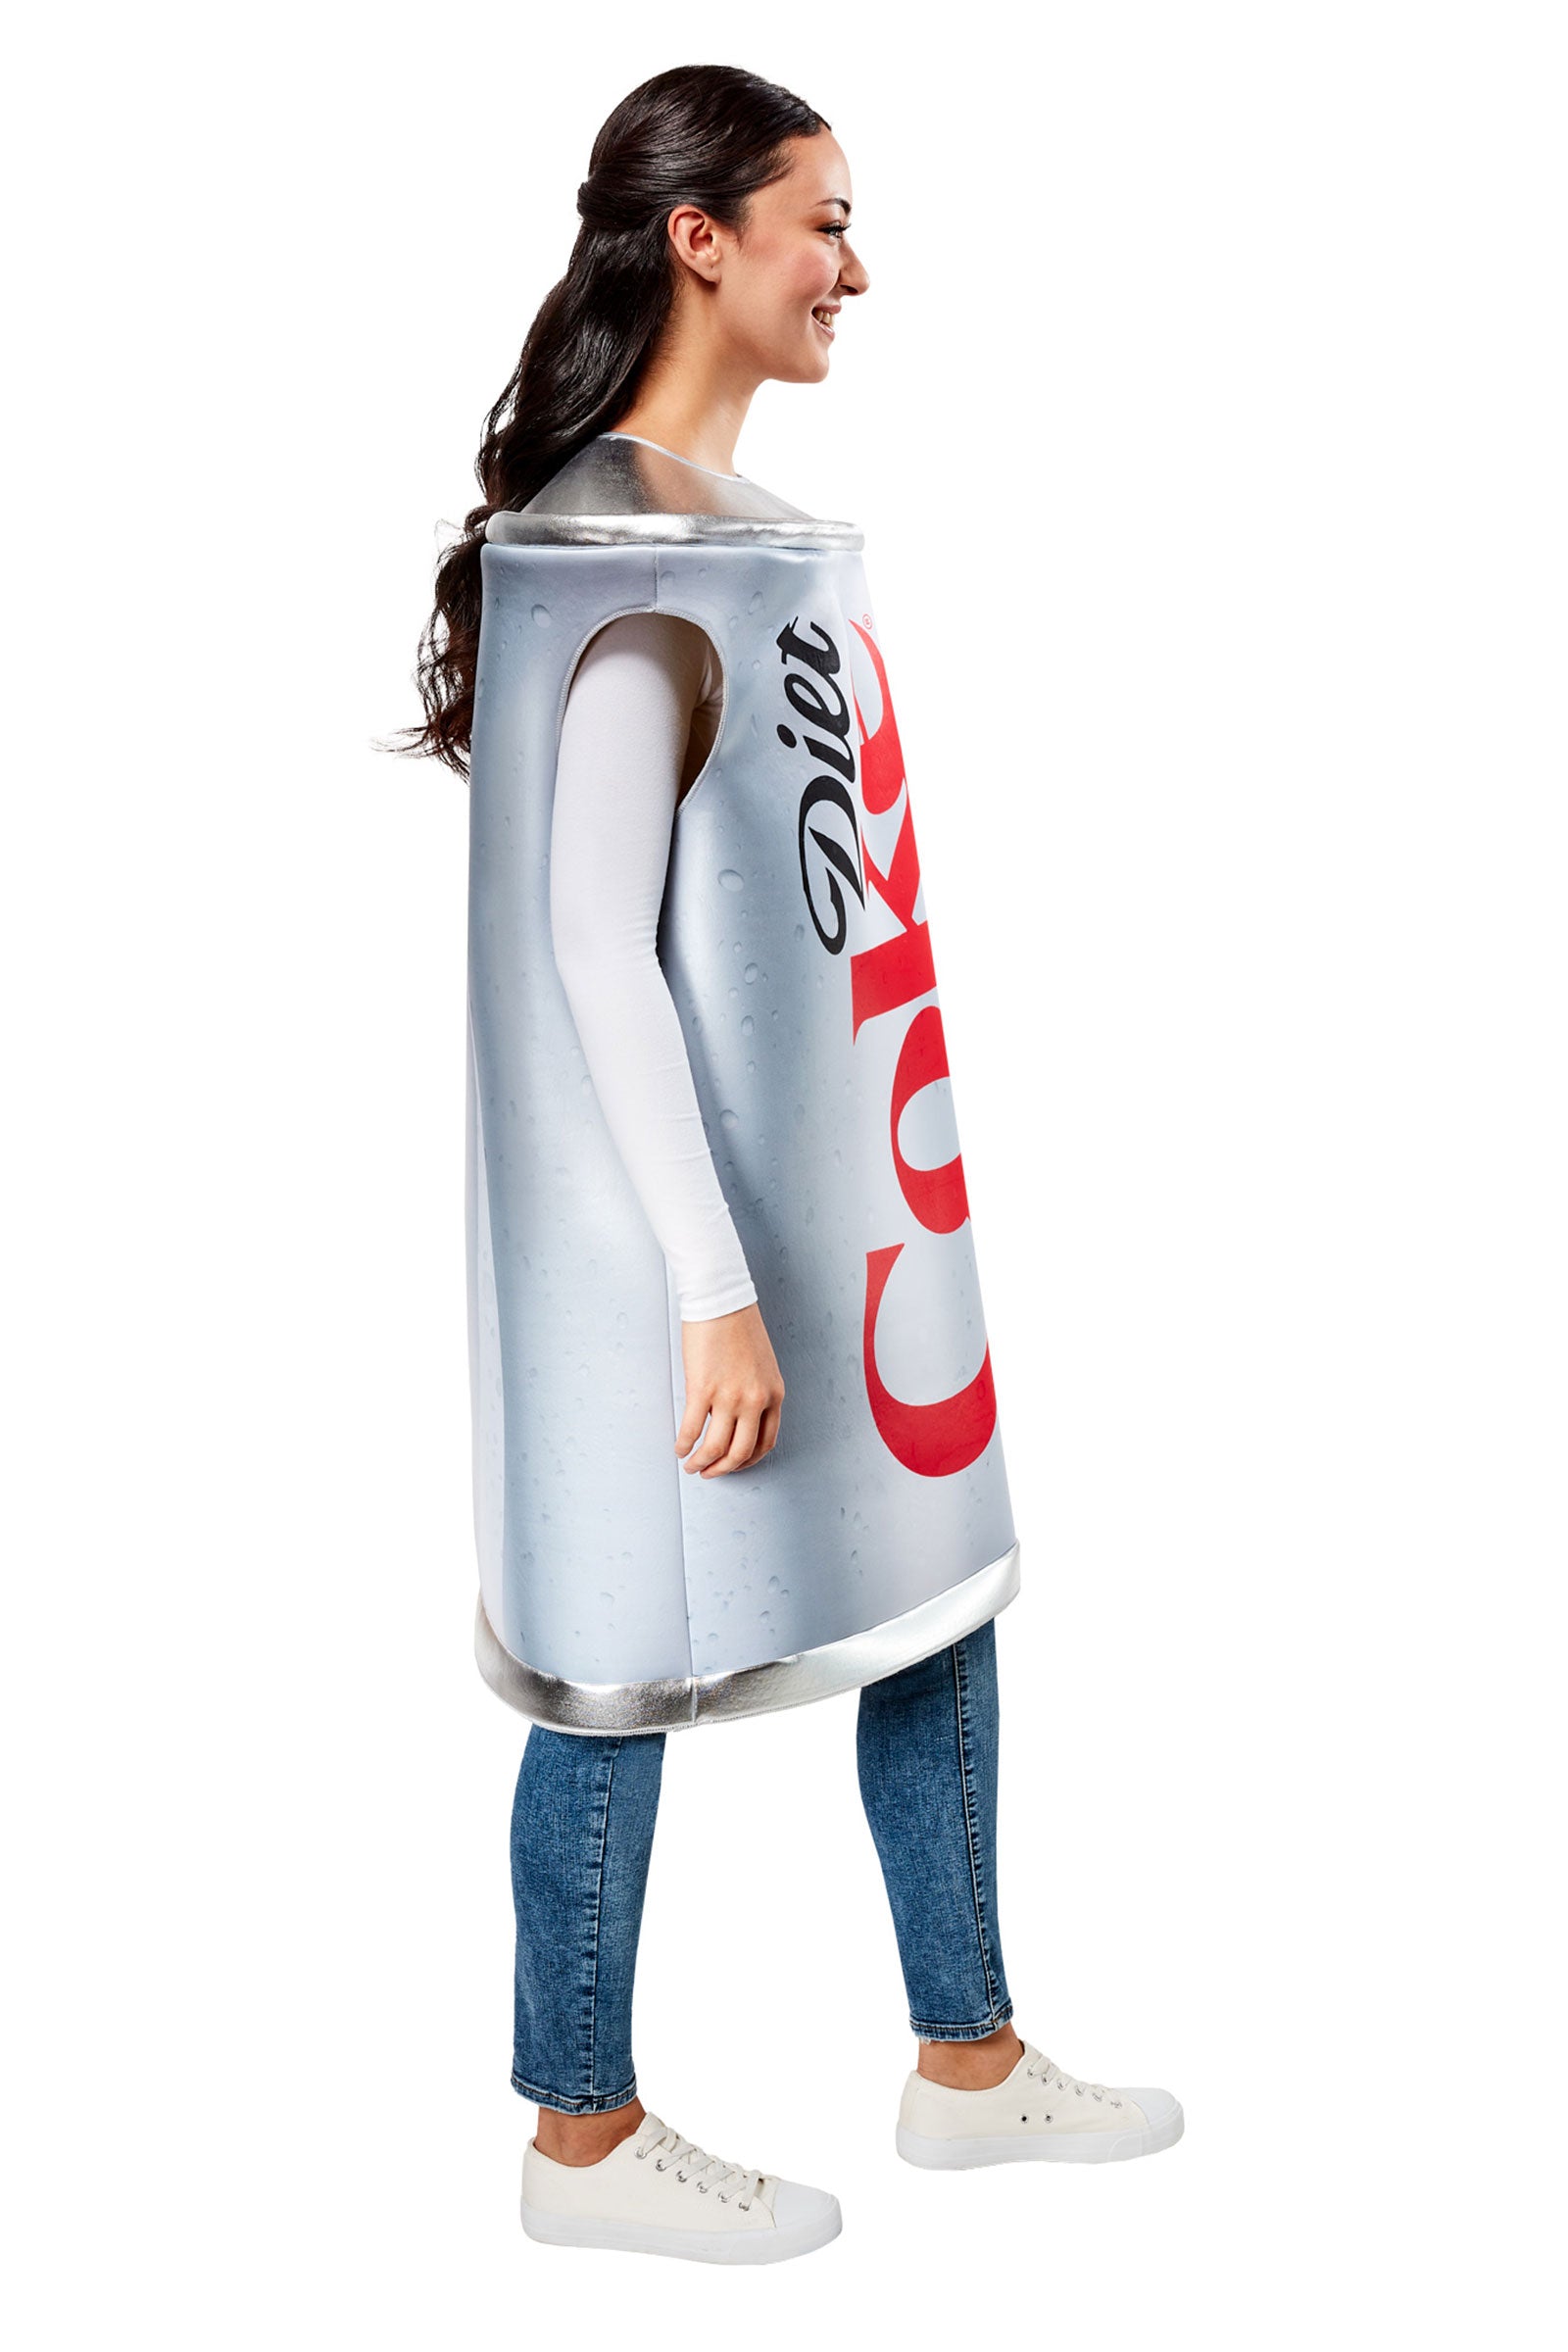 Diet Coke Can Adult Costume